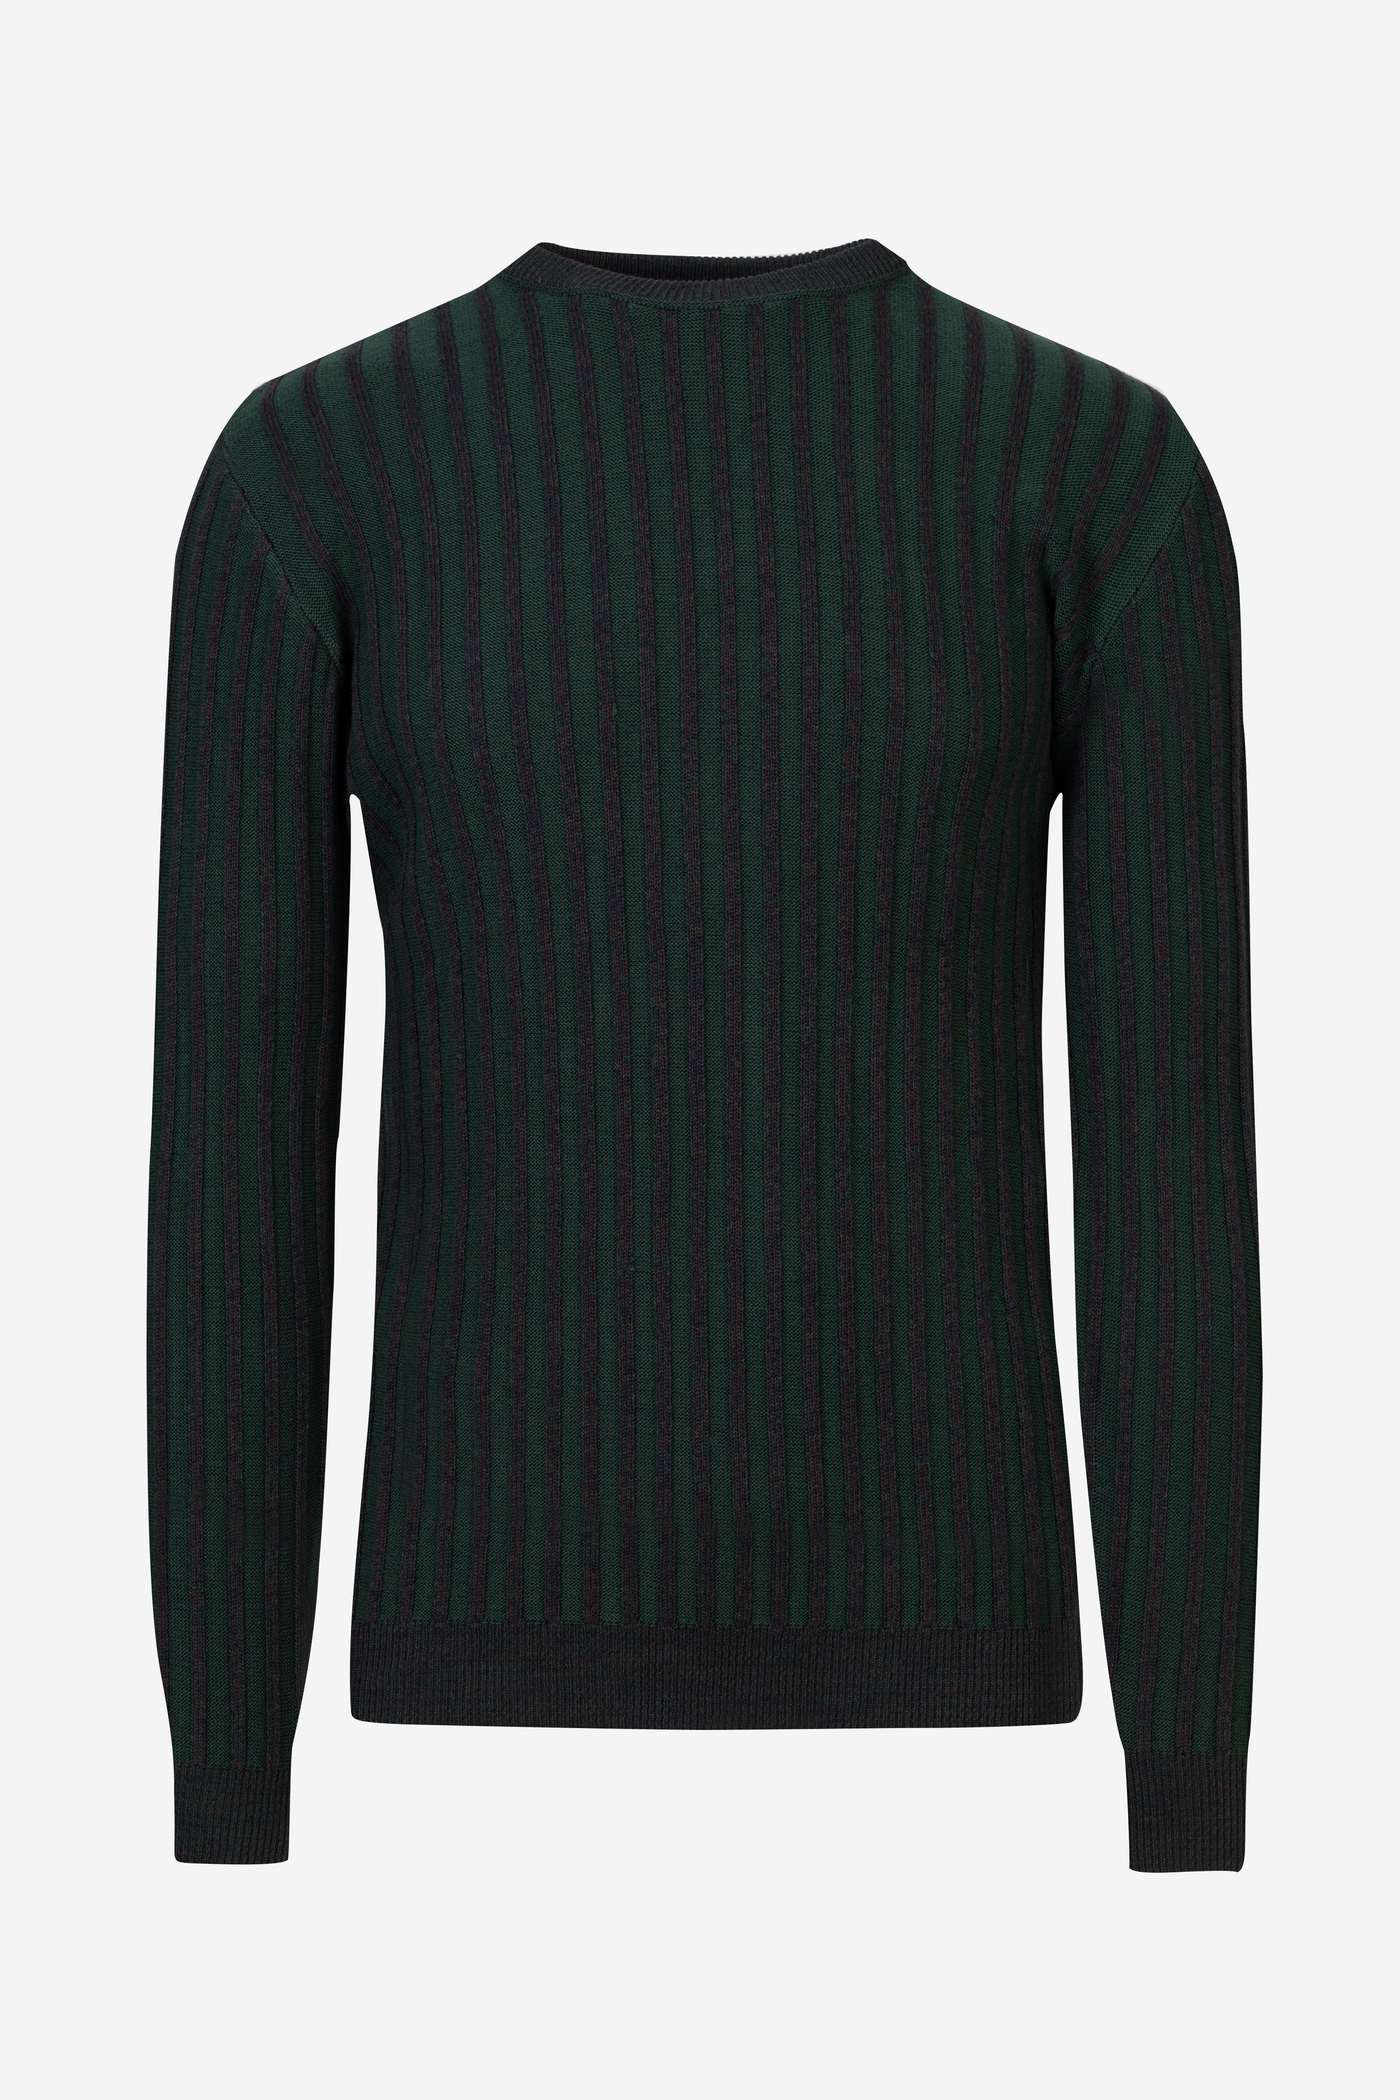 Forest Green Stripe Pullover